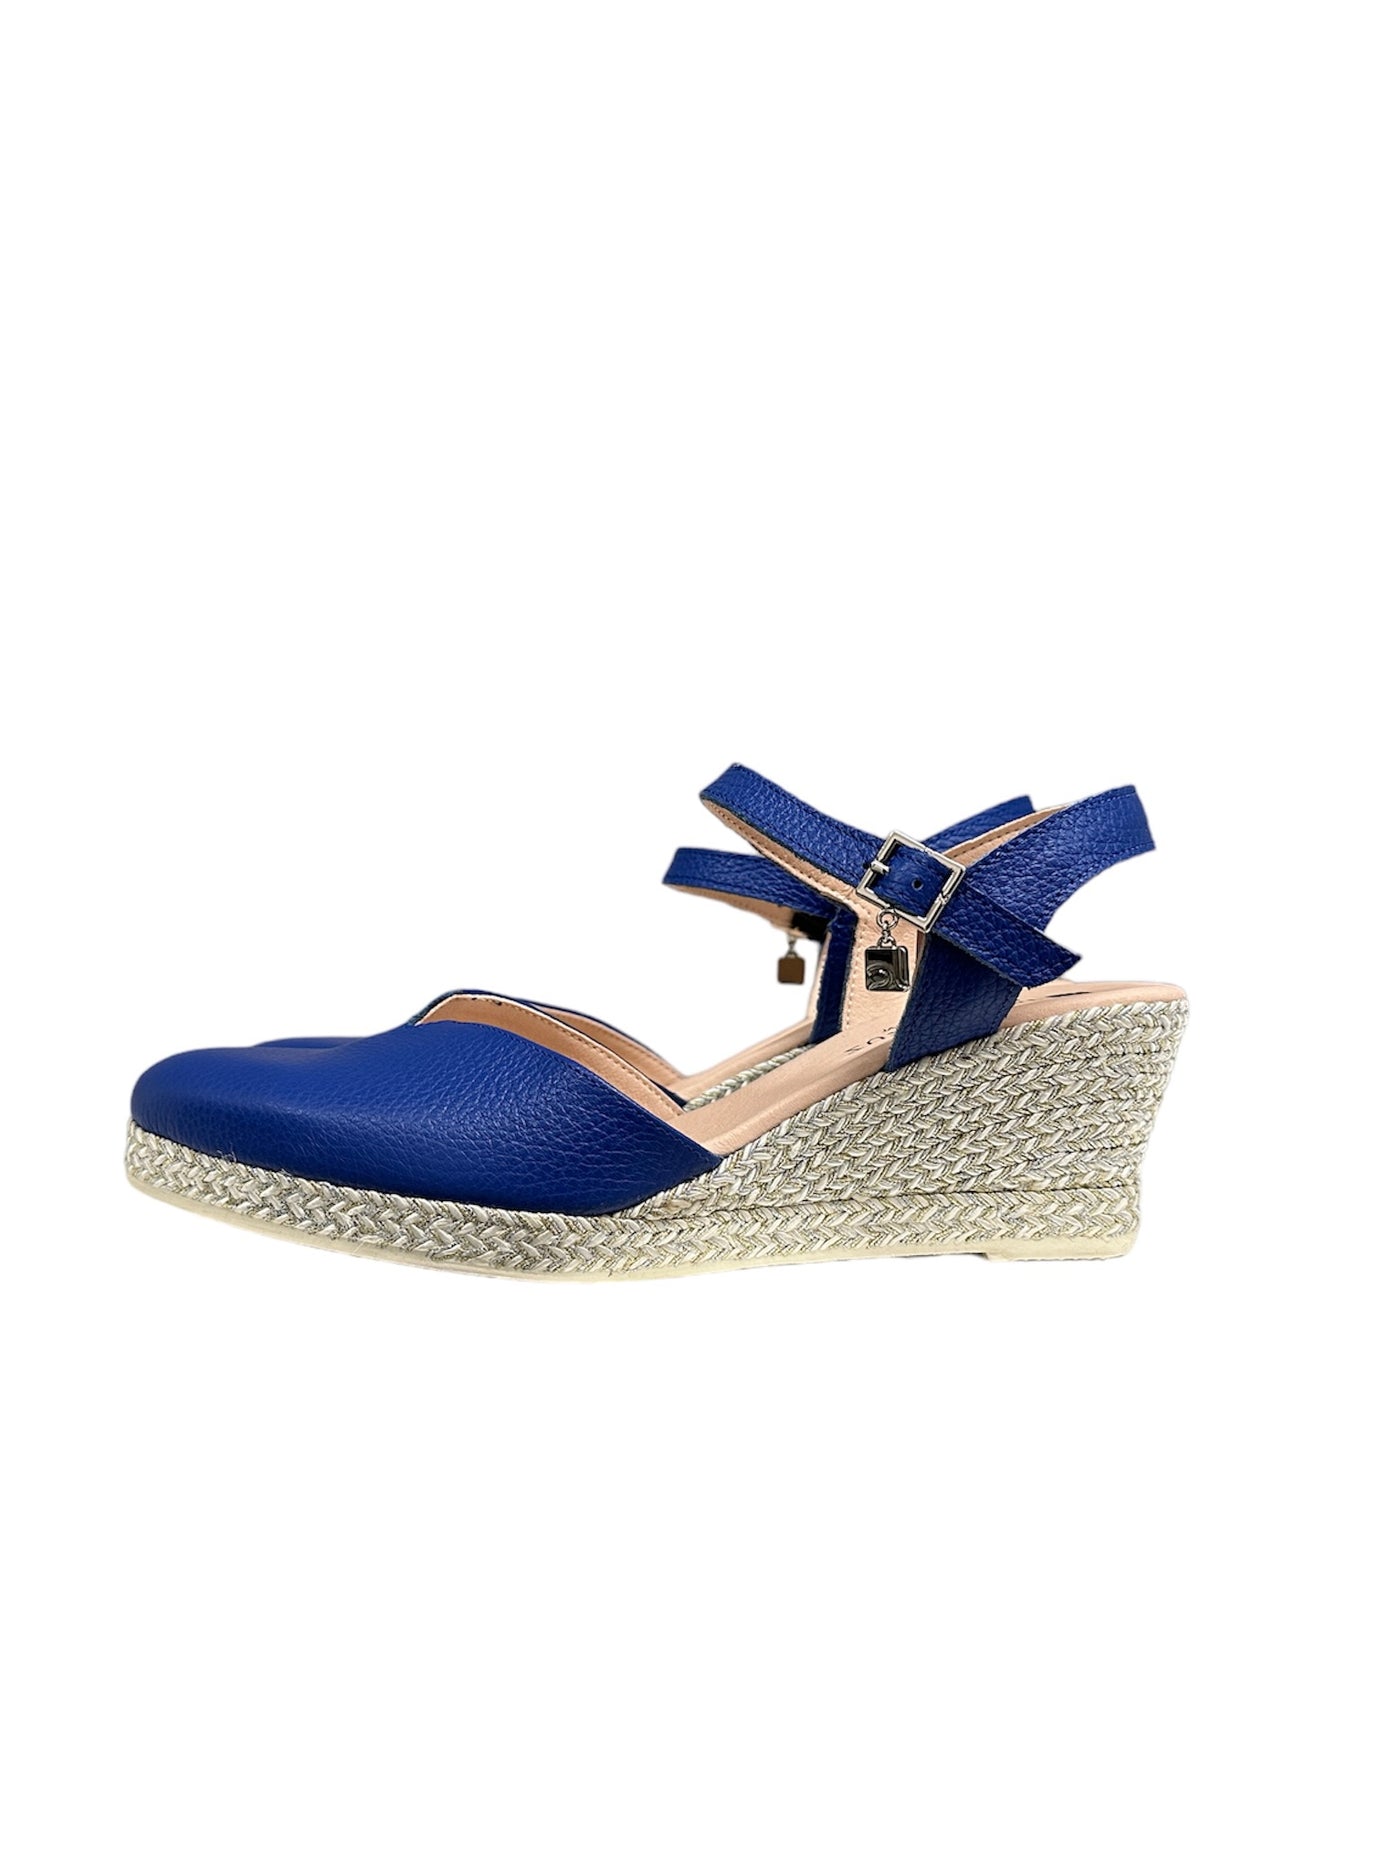 Royal Blue Wedge With Strap